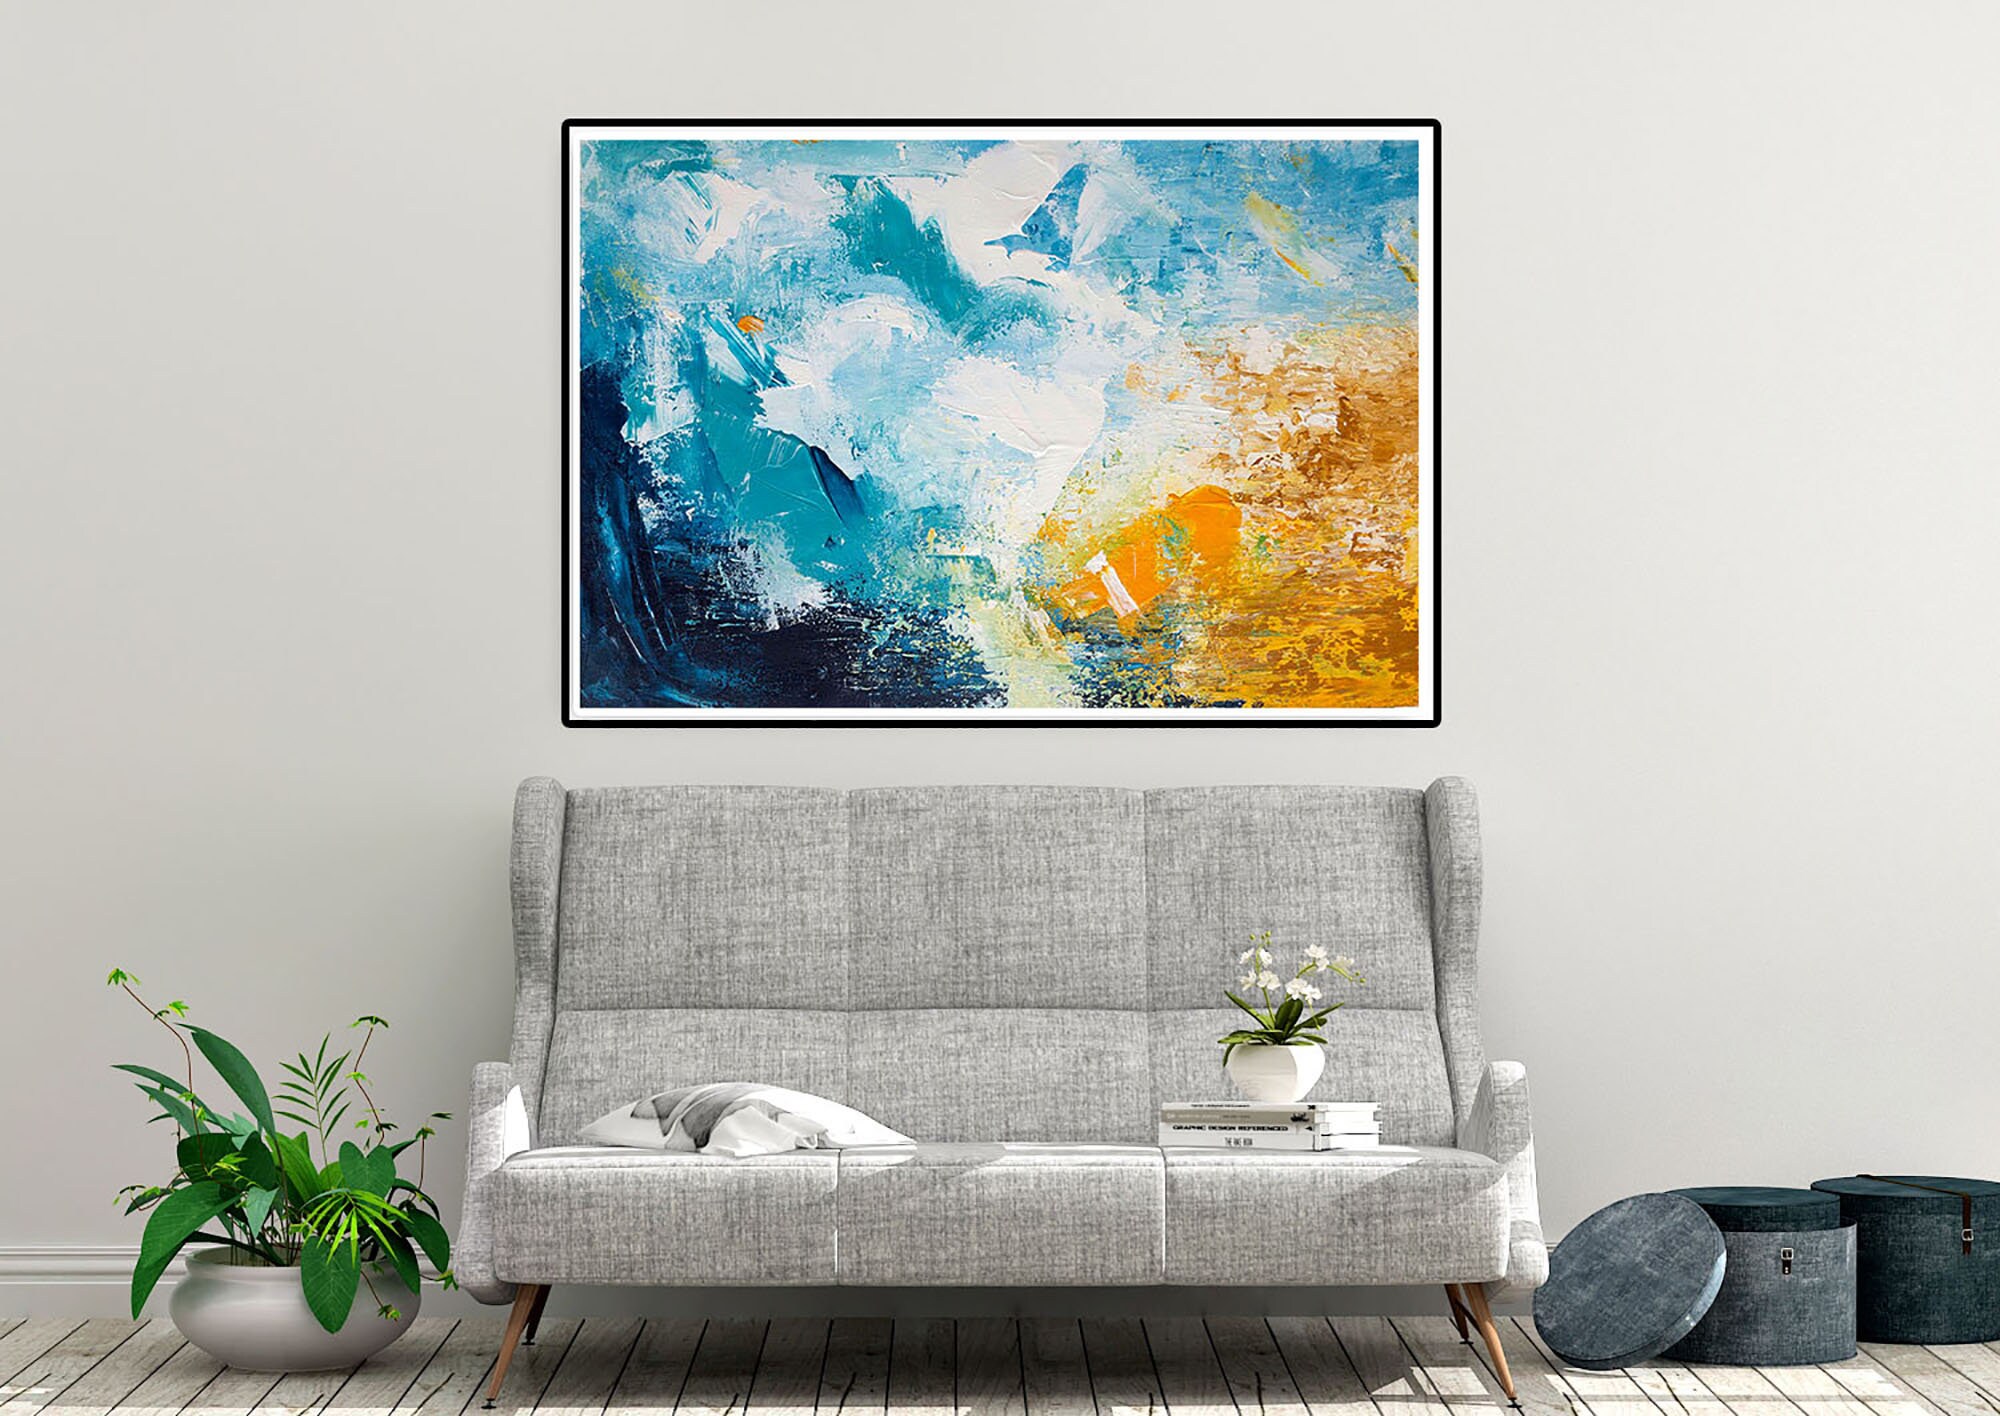 Original Abstract Painting on Canvas Wall Art Large - Etsy UK